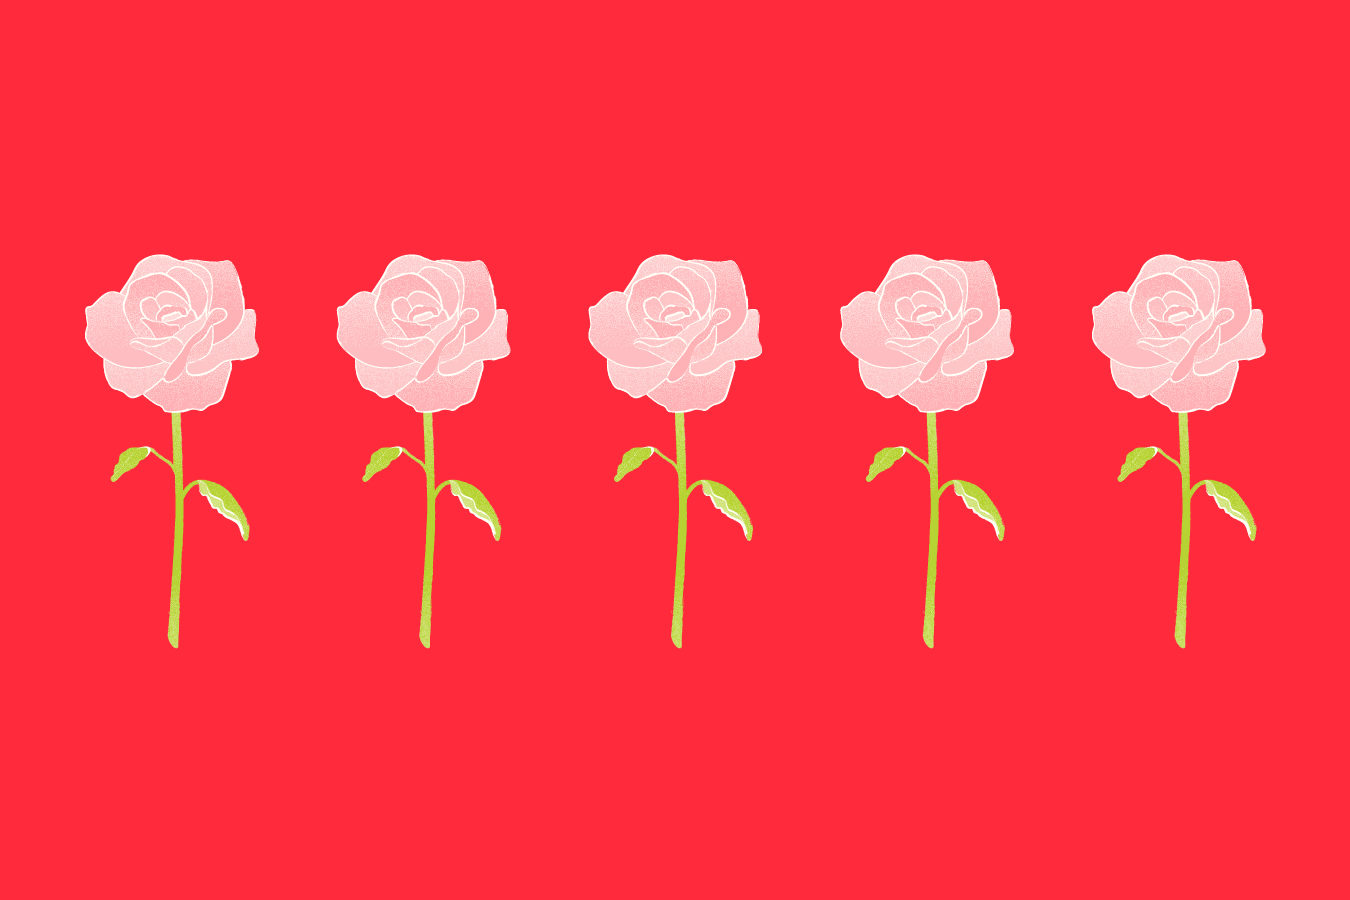 Roses to symbolize the "Rosies" or freelance marketers in our community.